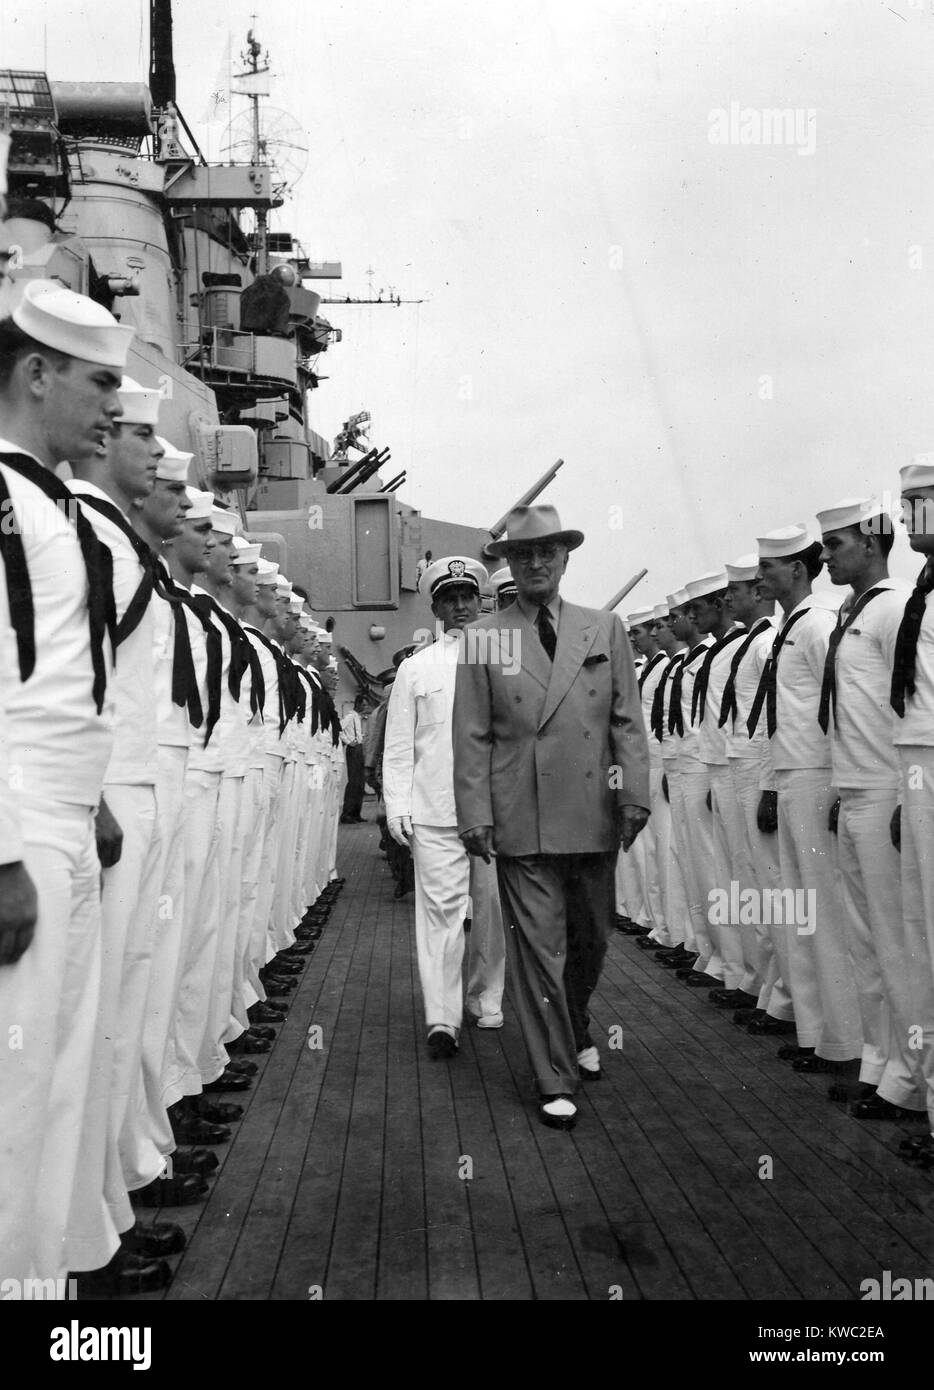 President Harry Truman inspects the personnel of the USS Missouri, ca. 09/08/1947. Truman and his family returned from a state visit to Brazil on the storied battleship, from Sept. 8-15. (BSLOC_2015_2_237) Stock Photo